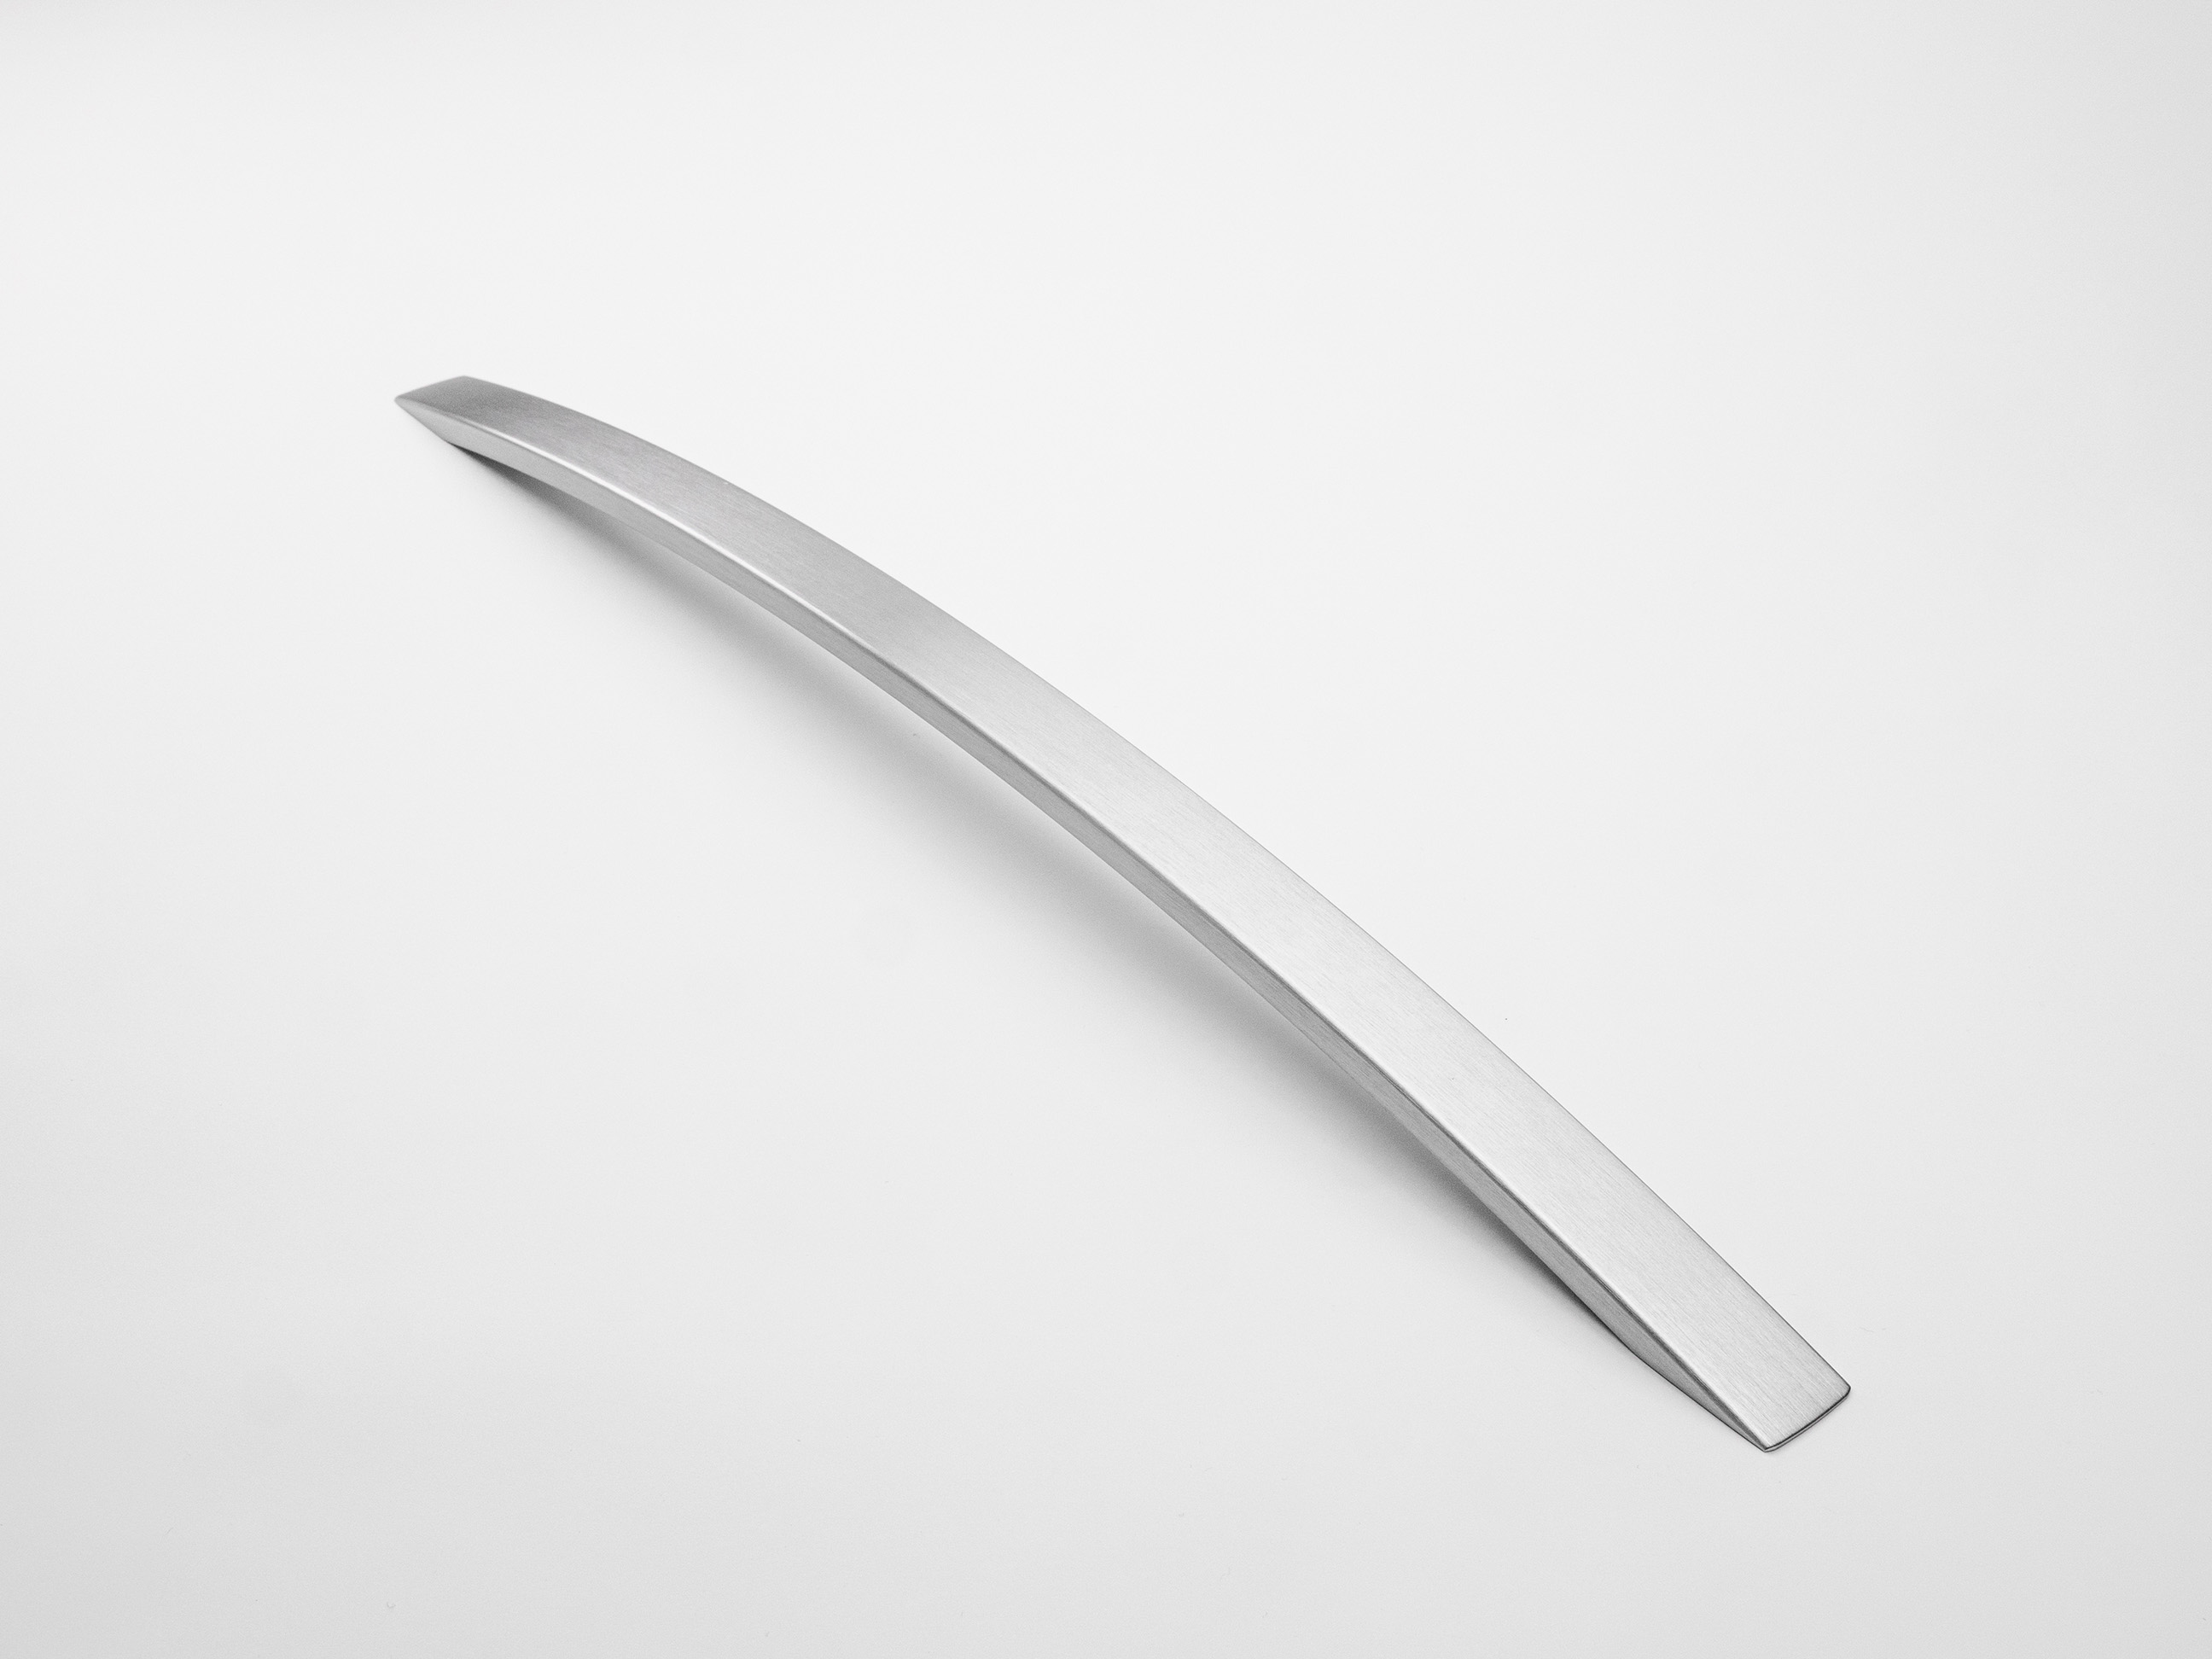 Rolled Oven Handle - Brushed Anodized Stainless Steel